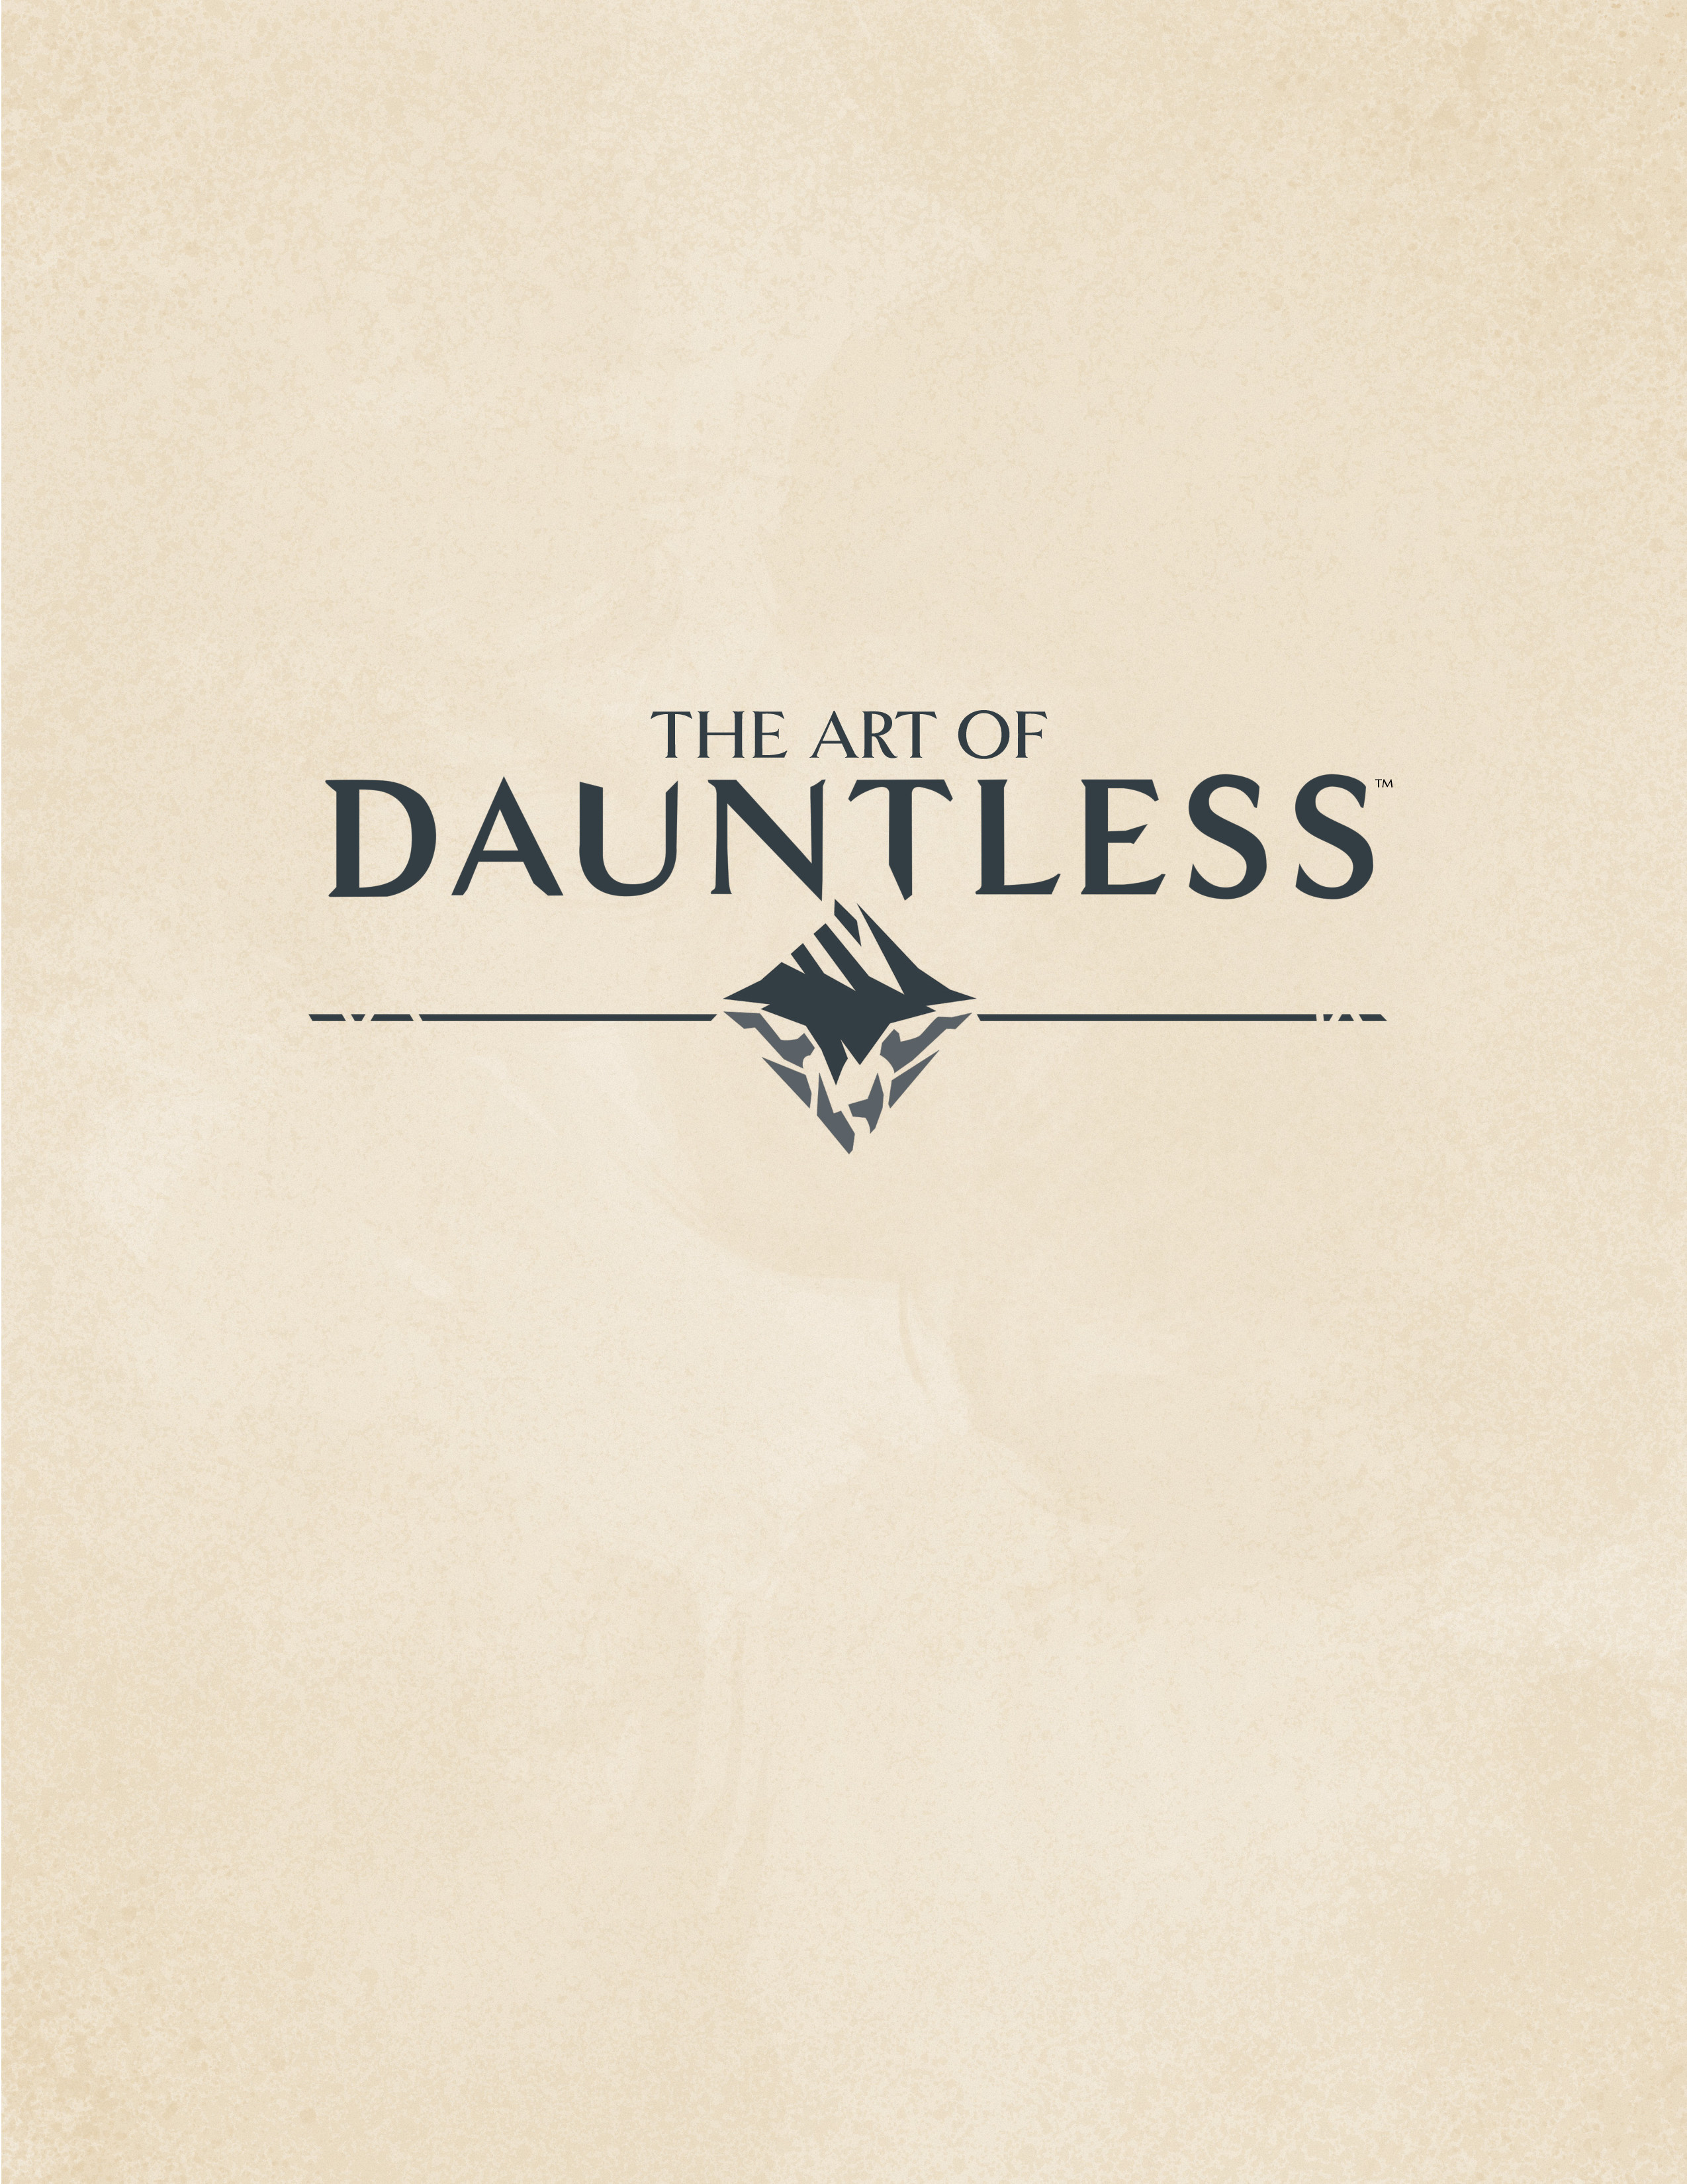 Read online The Art of Dauntless comic -  Issue # TPB - 4